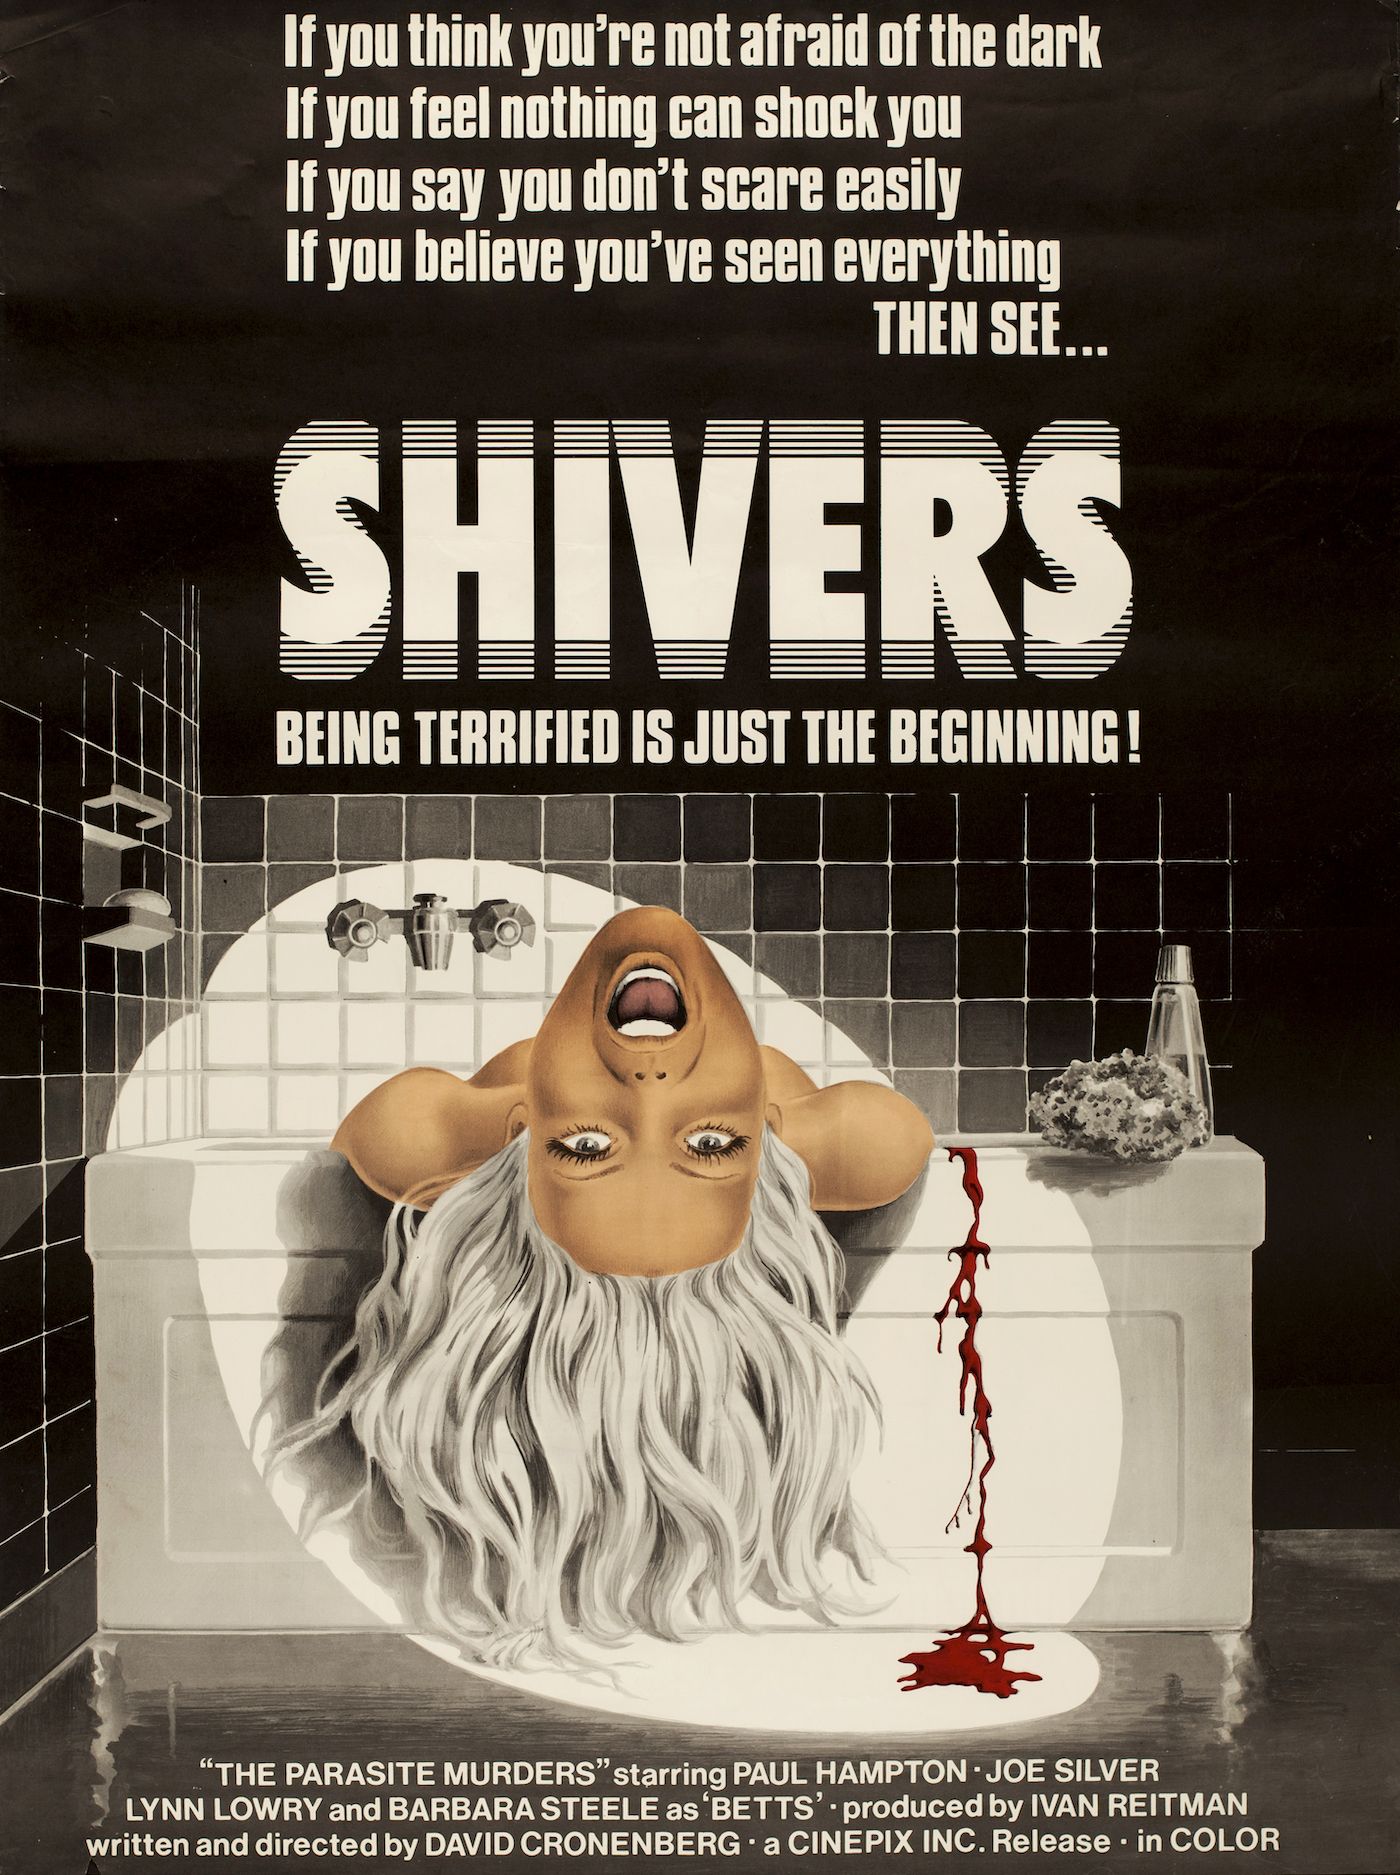 Shivers 1975 Poster